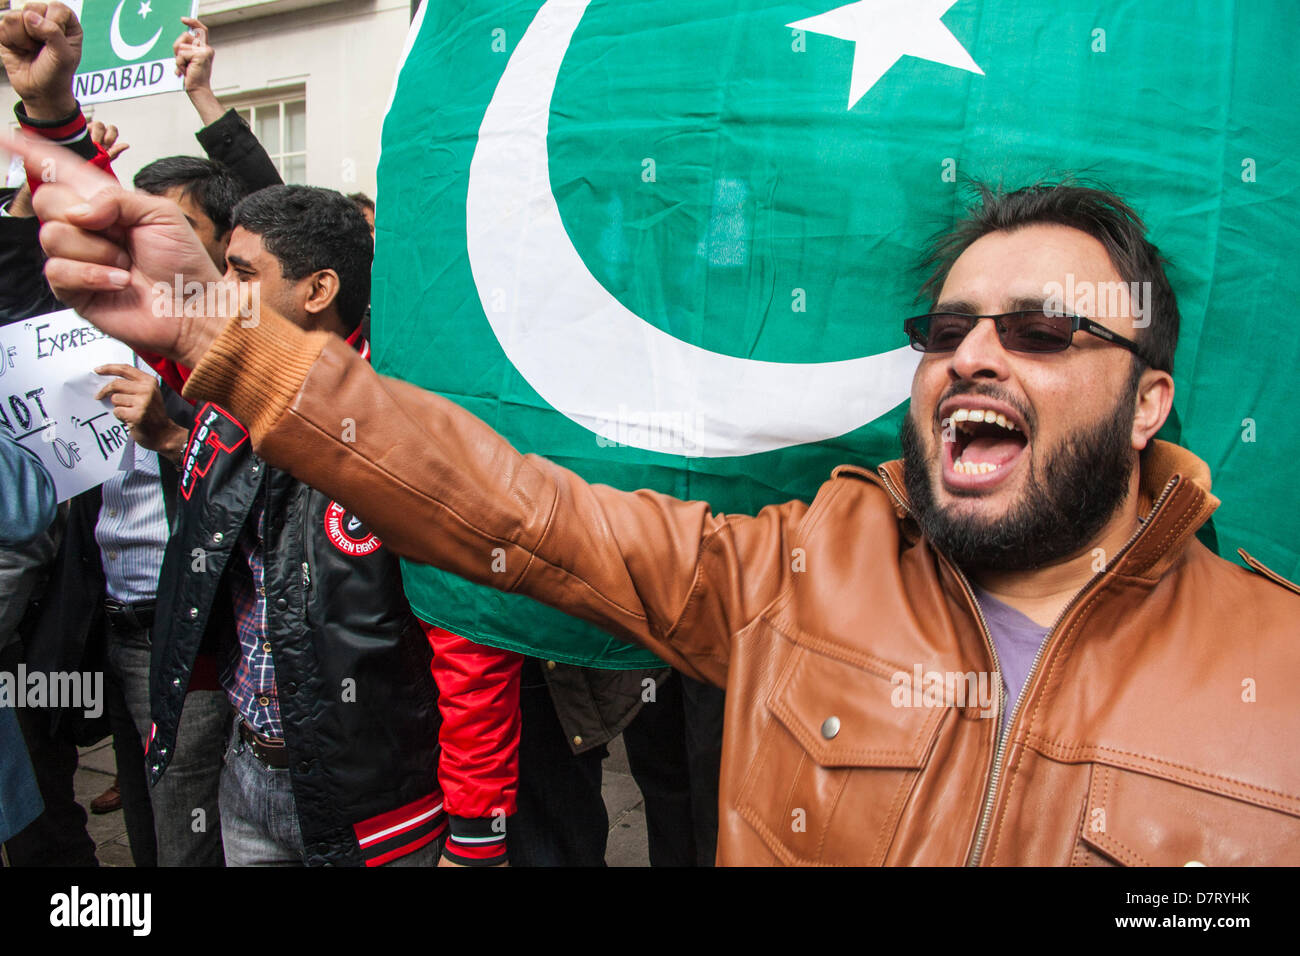 London, UK. 13th May, 2013. A Pakistani protester chants slogans against the alleged rigging of Pakistan's general election. Credit: Paul Davey/Alamy Live News Stock Photo